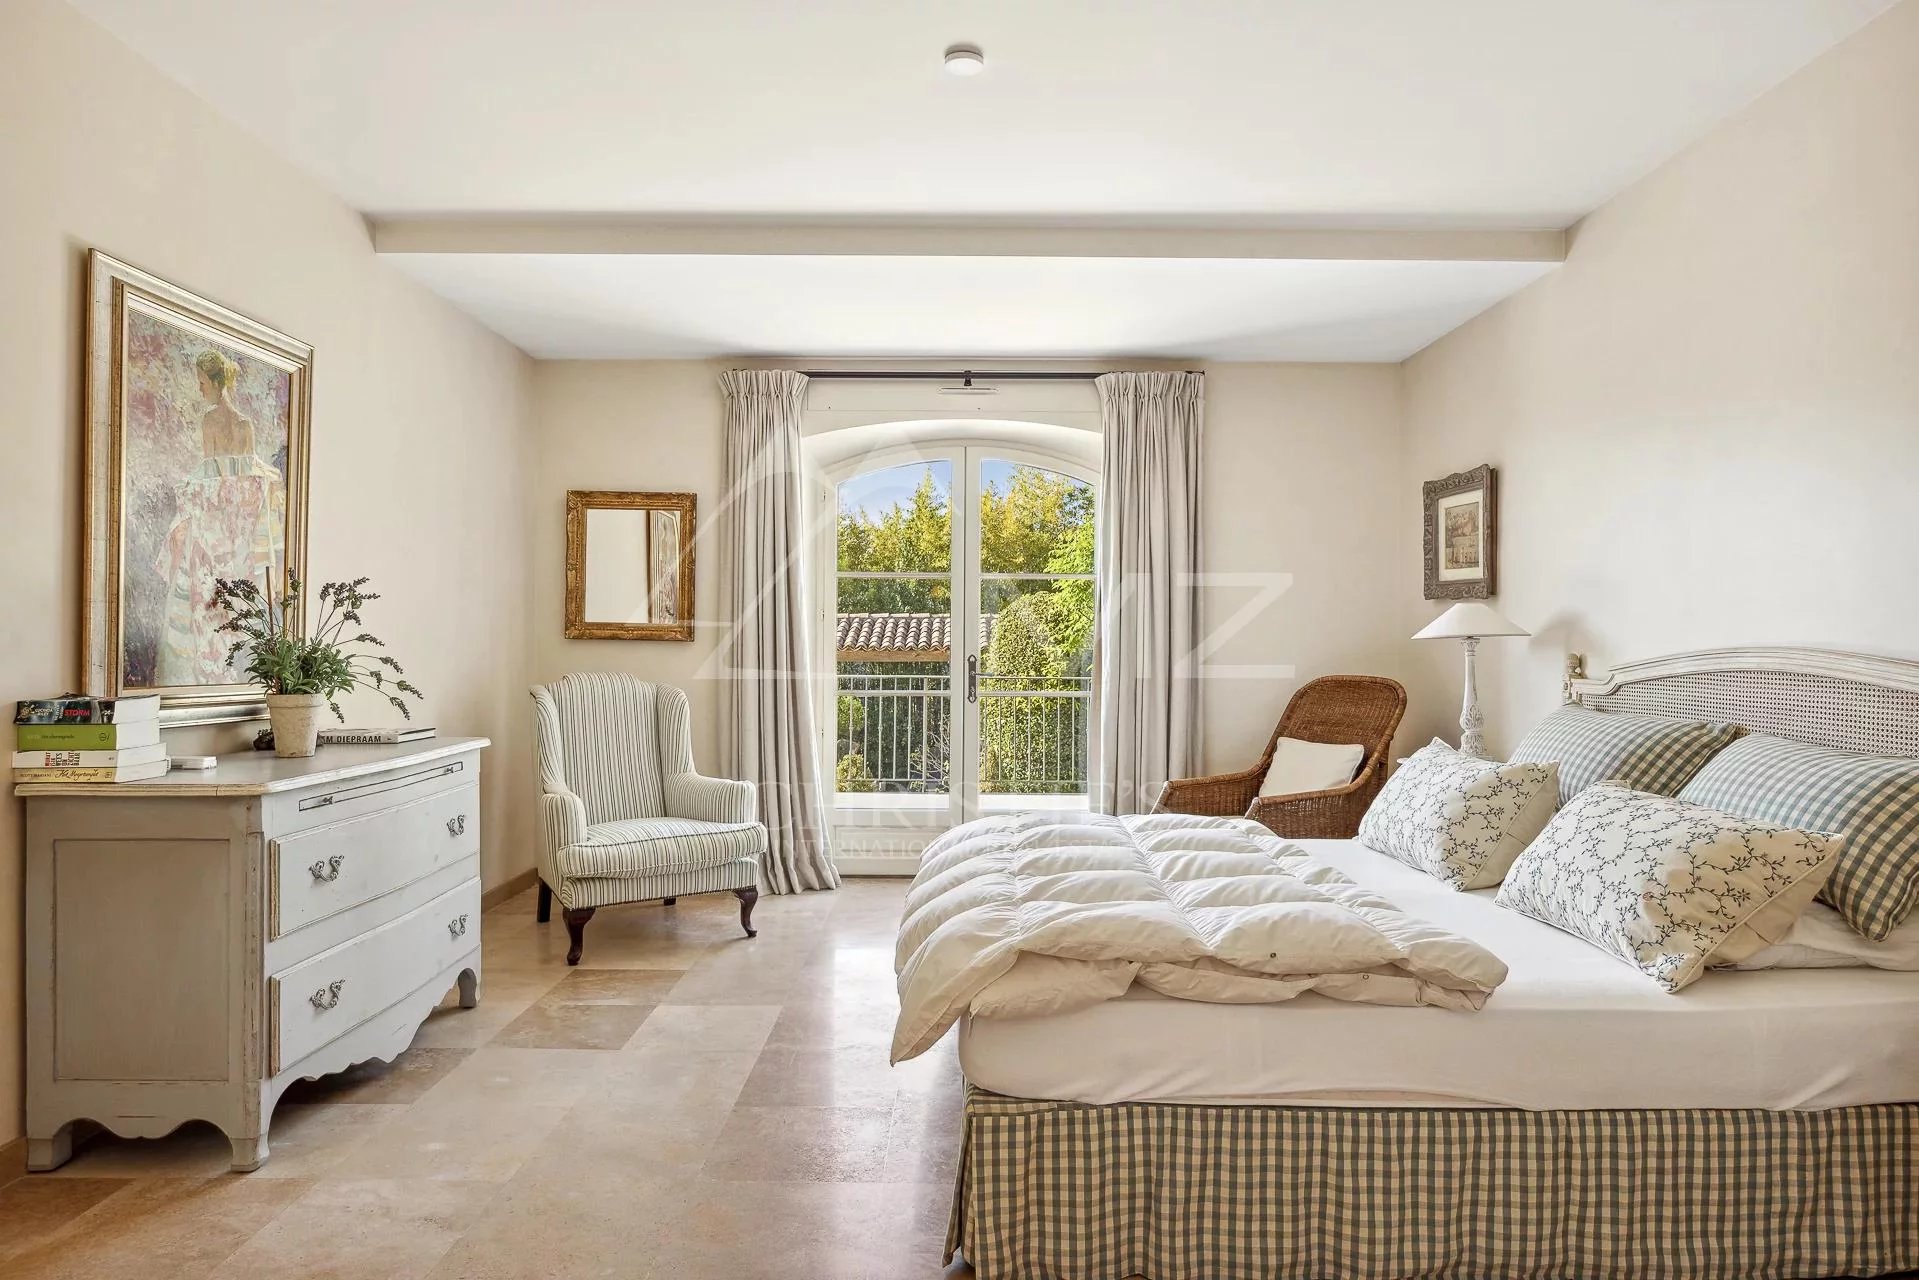 Walking distance to the village of Mougins and amenities